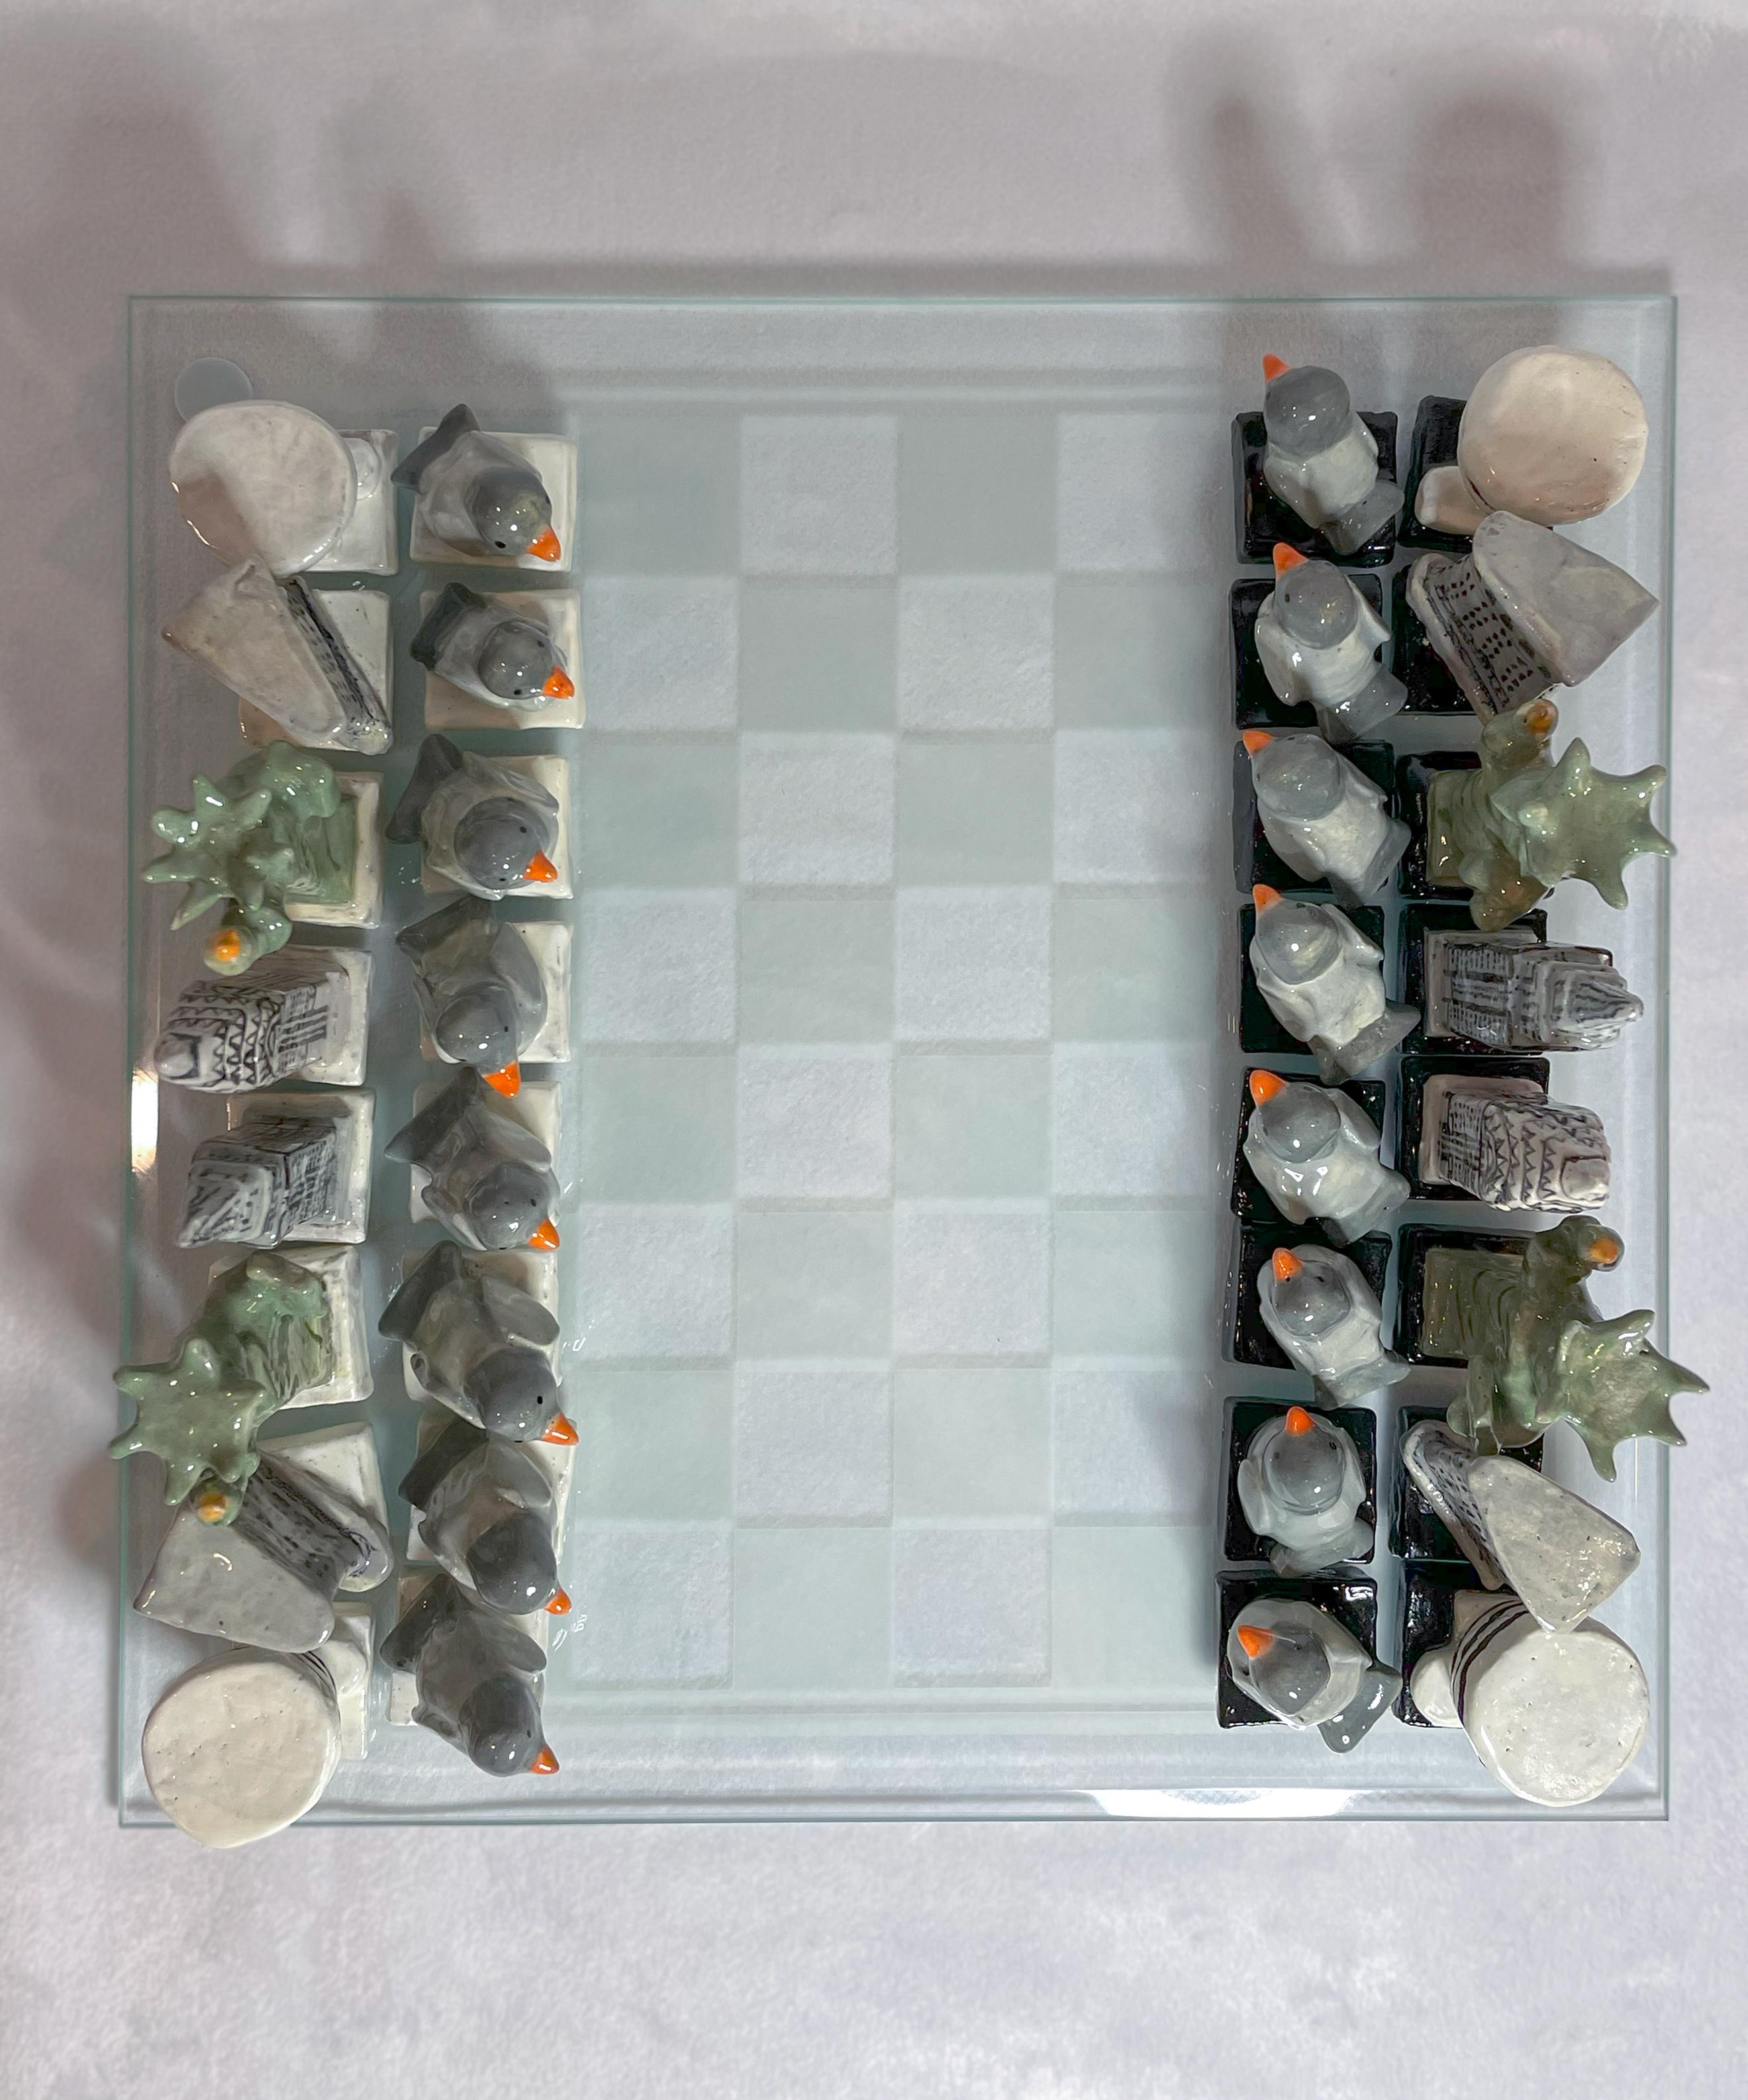 Glazed NYC Themed Handcrafted Chess Set